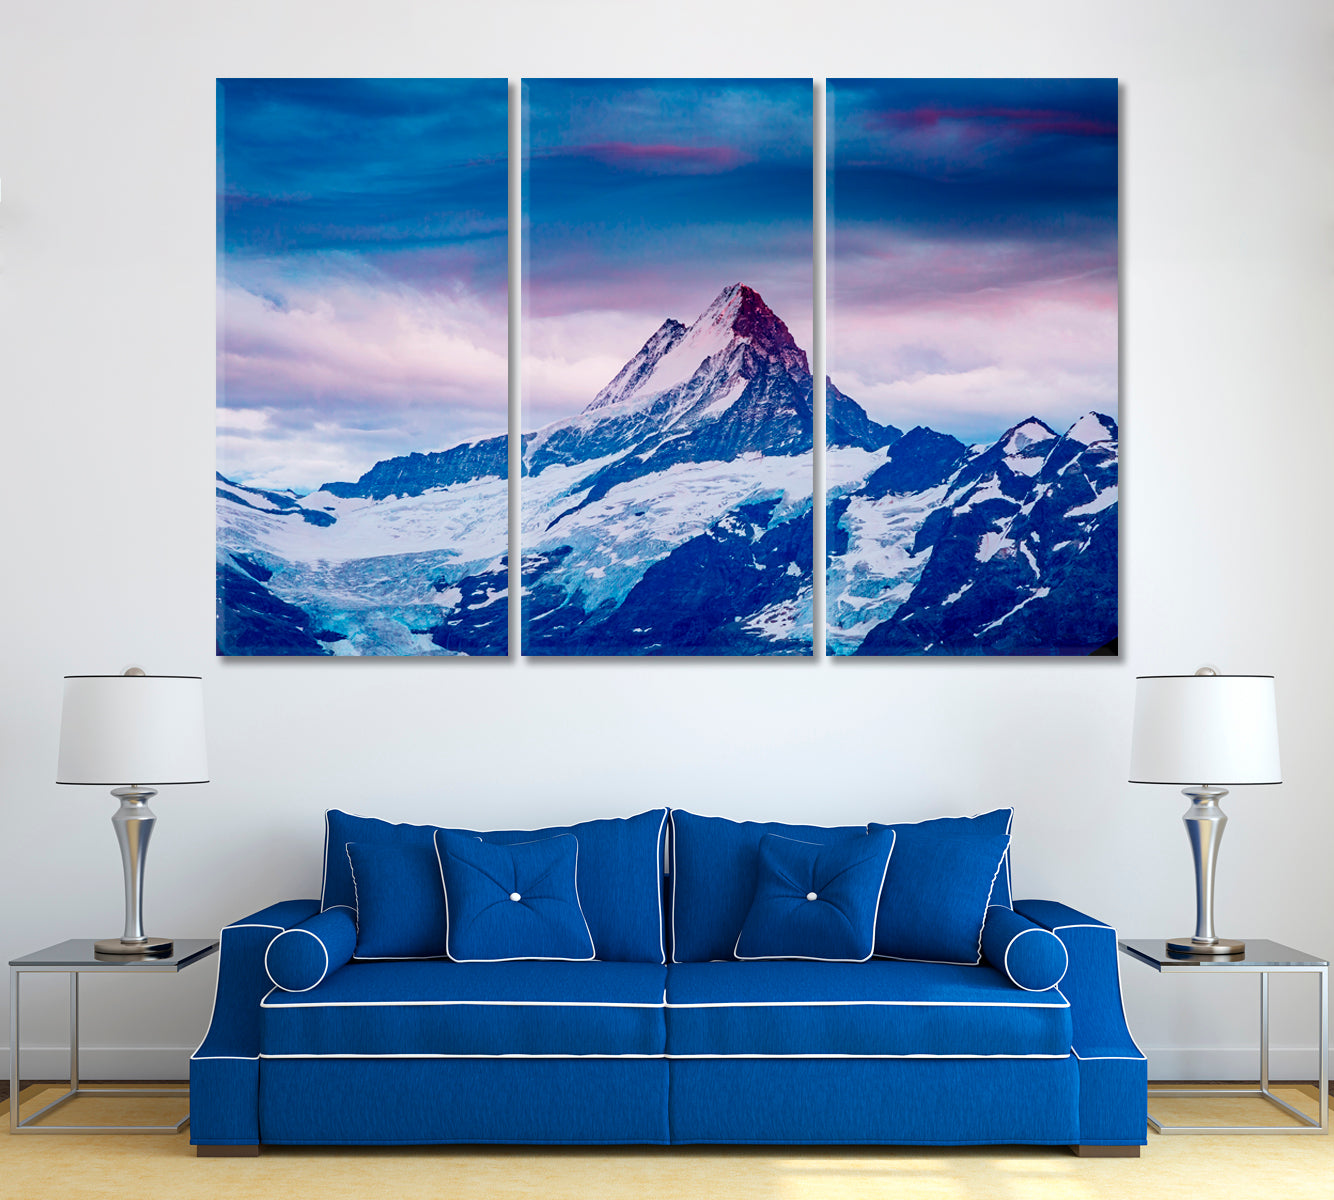 Snowy Mountains in Swiss Alps Canvas Print ArtLexy 3 Panels 36"x24" inches 